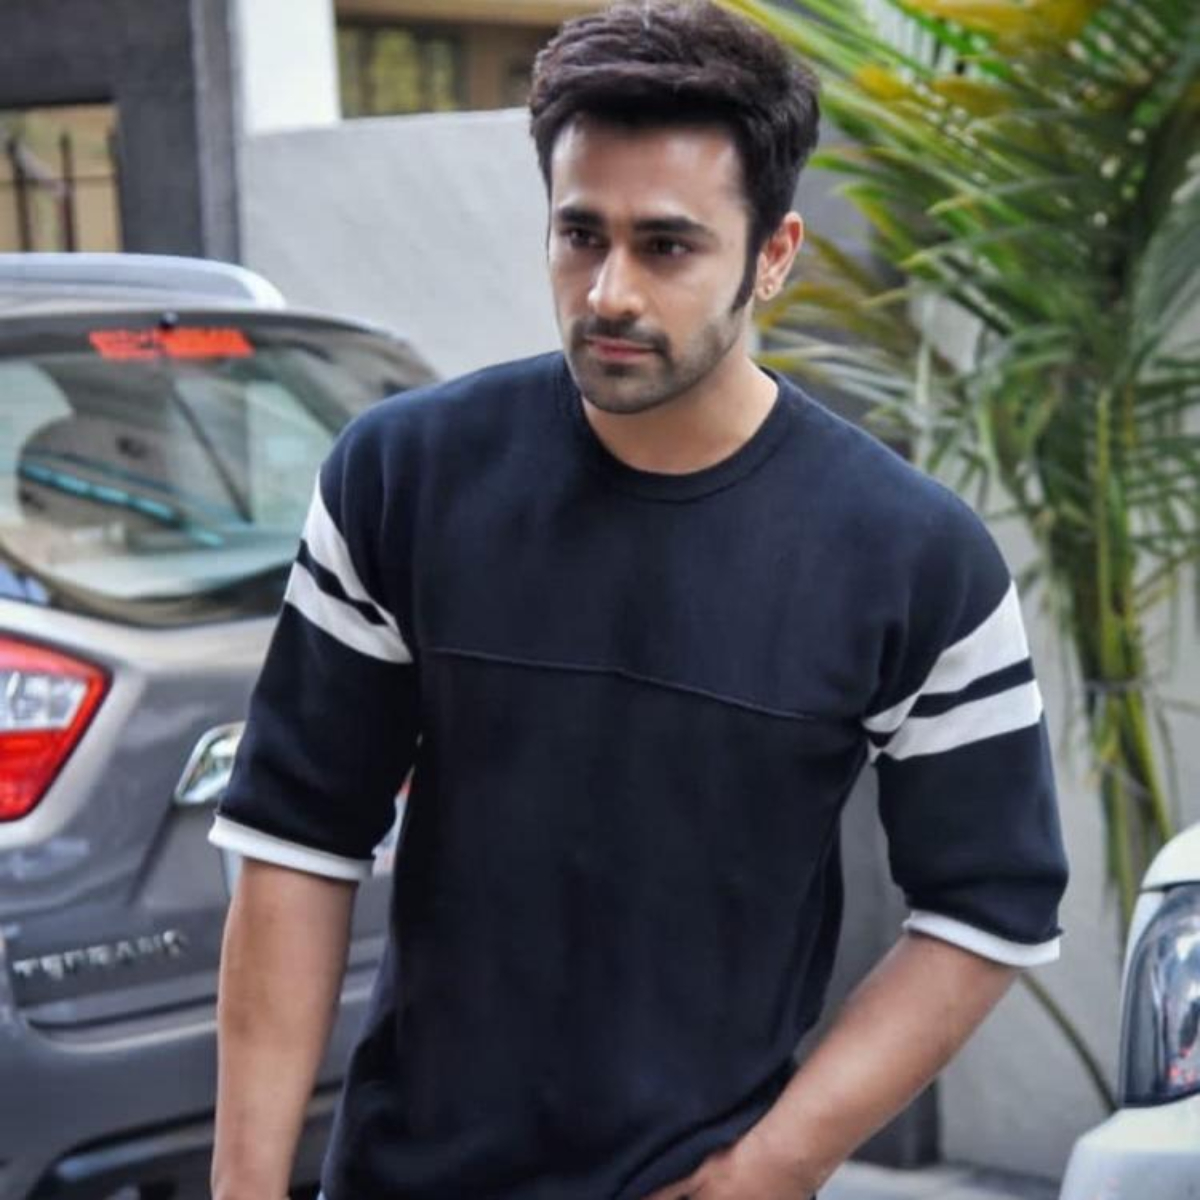 EXCLUSIVE: Pearl V Puri’s friend Rashmi Aarya says truth will come out soon: ‘I have full faith in judiciary’